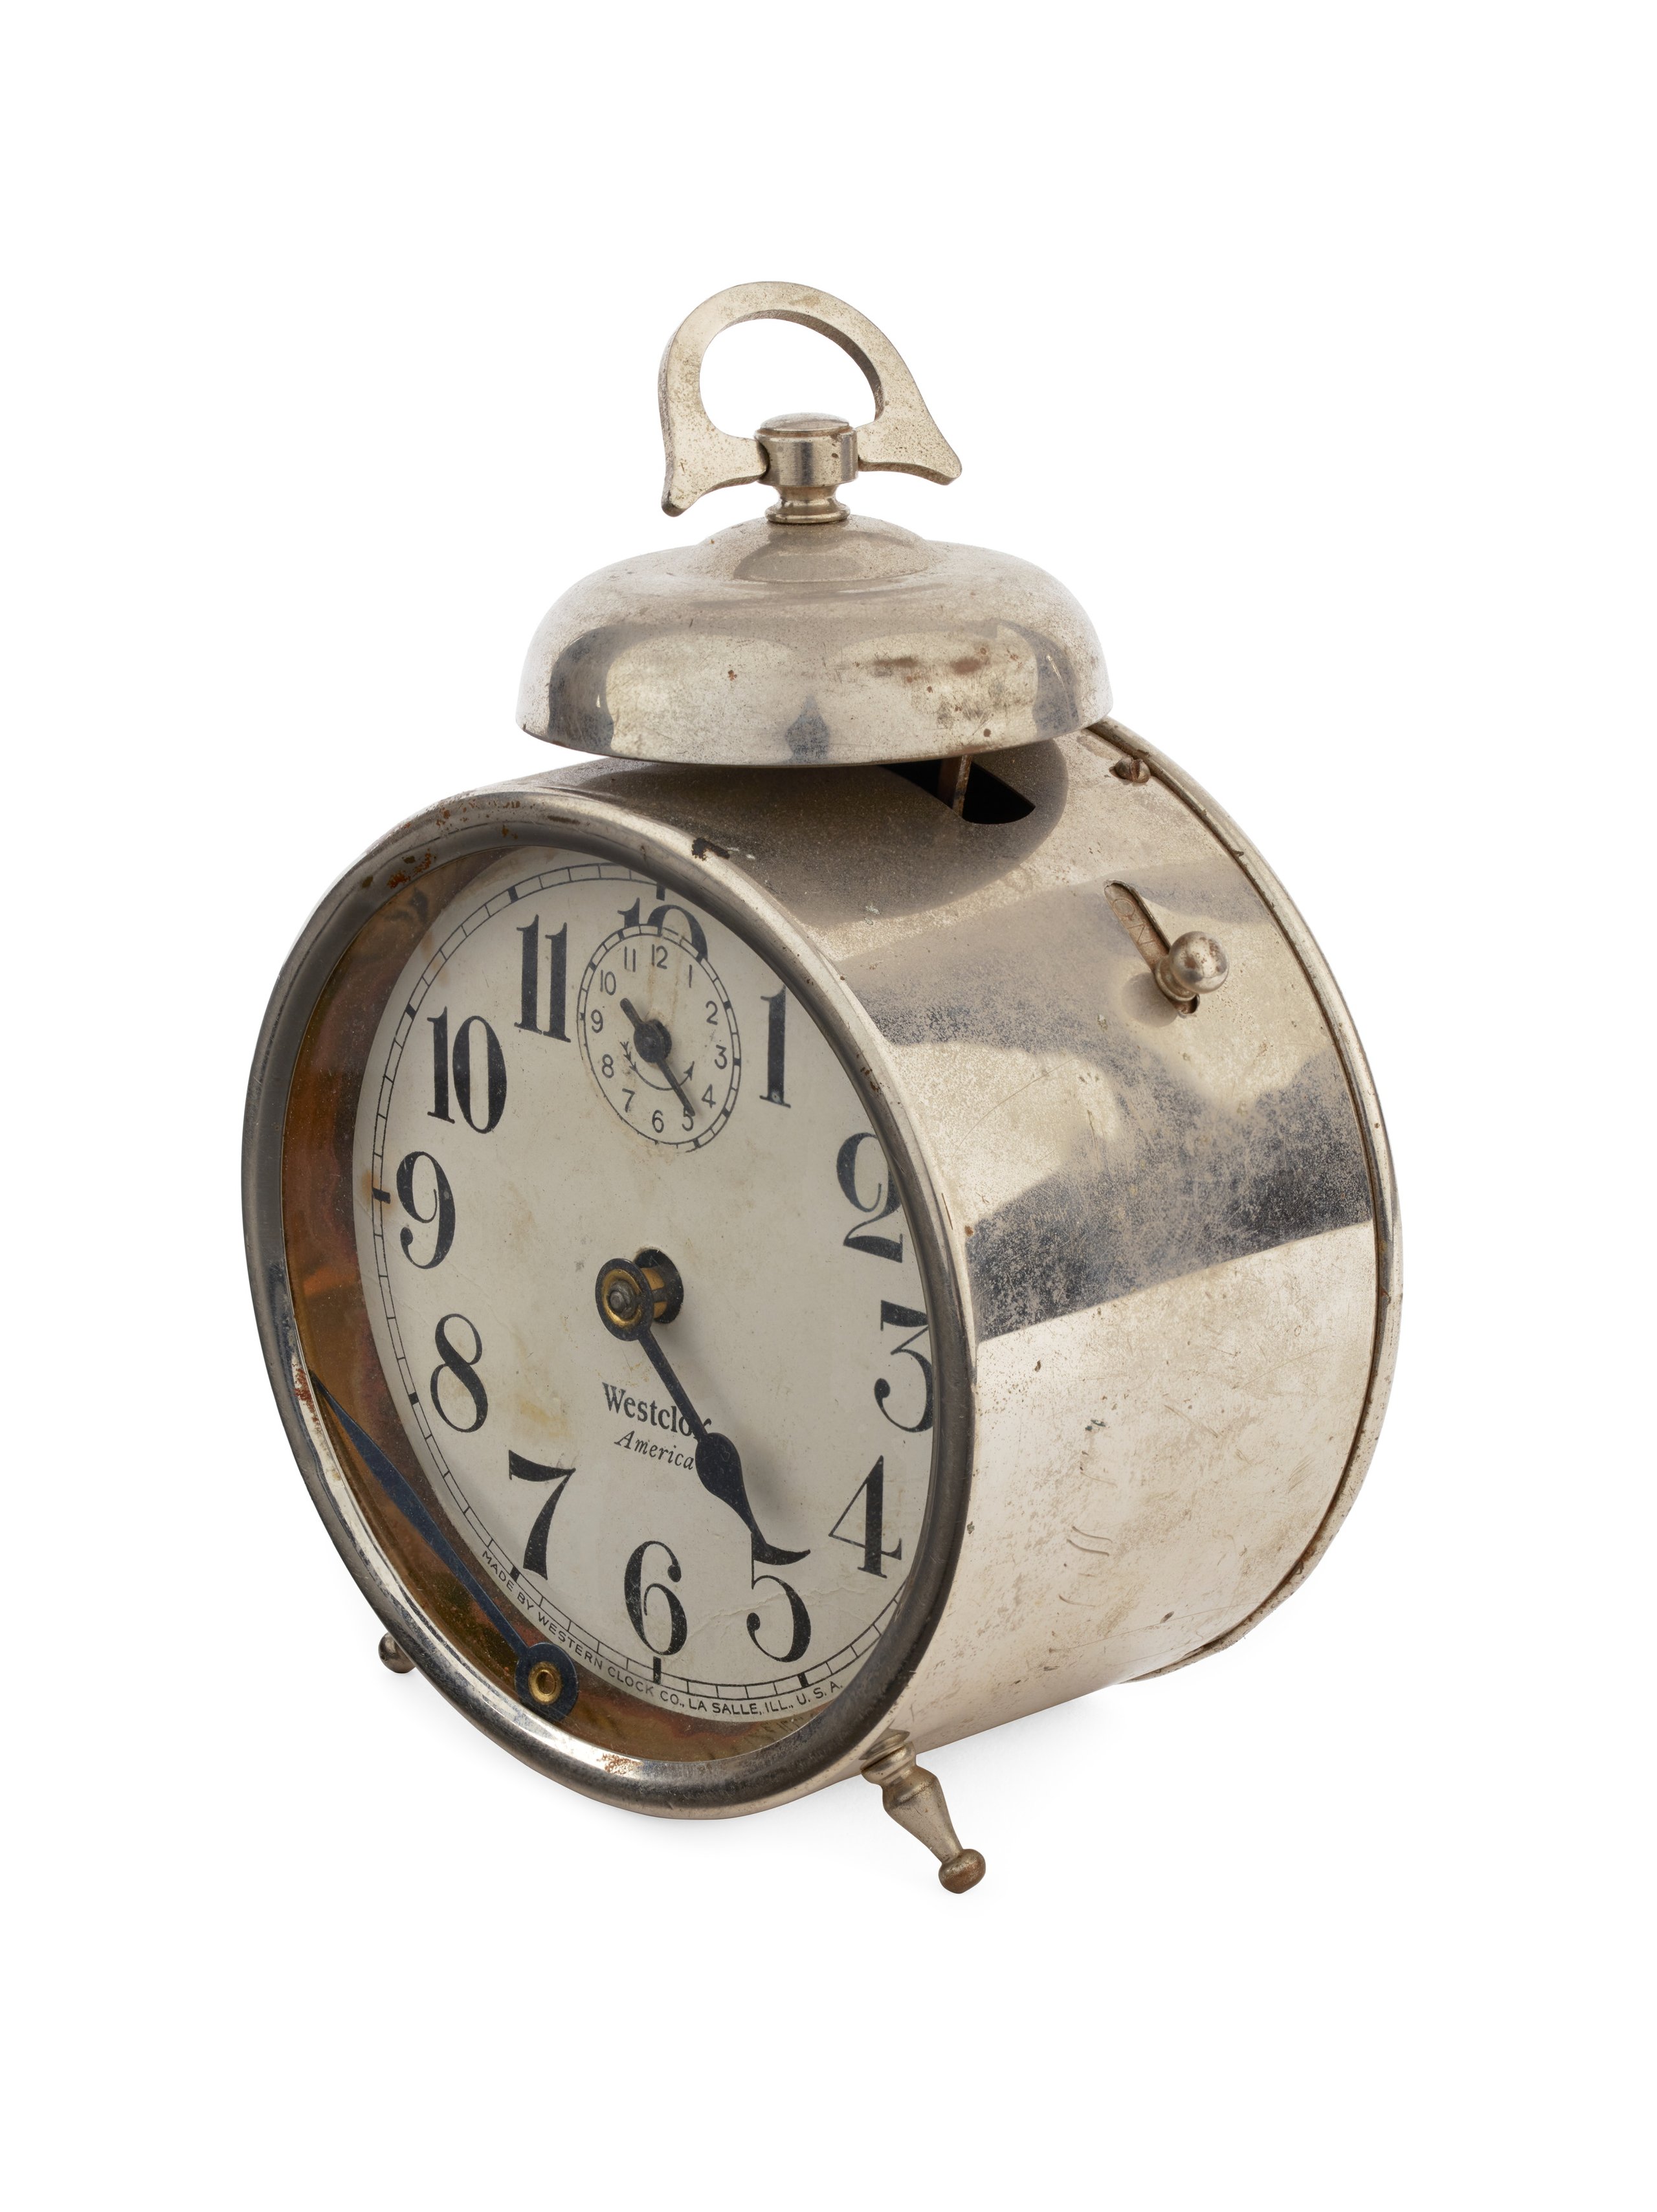 Powerhouse Collection - Alarm clock made by Westclox